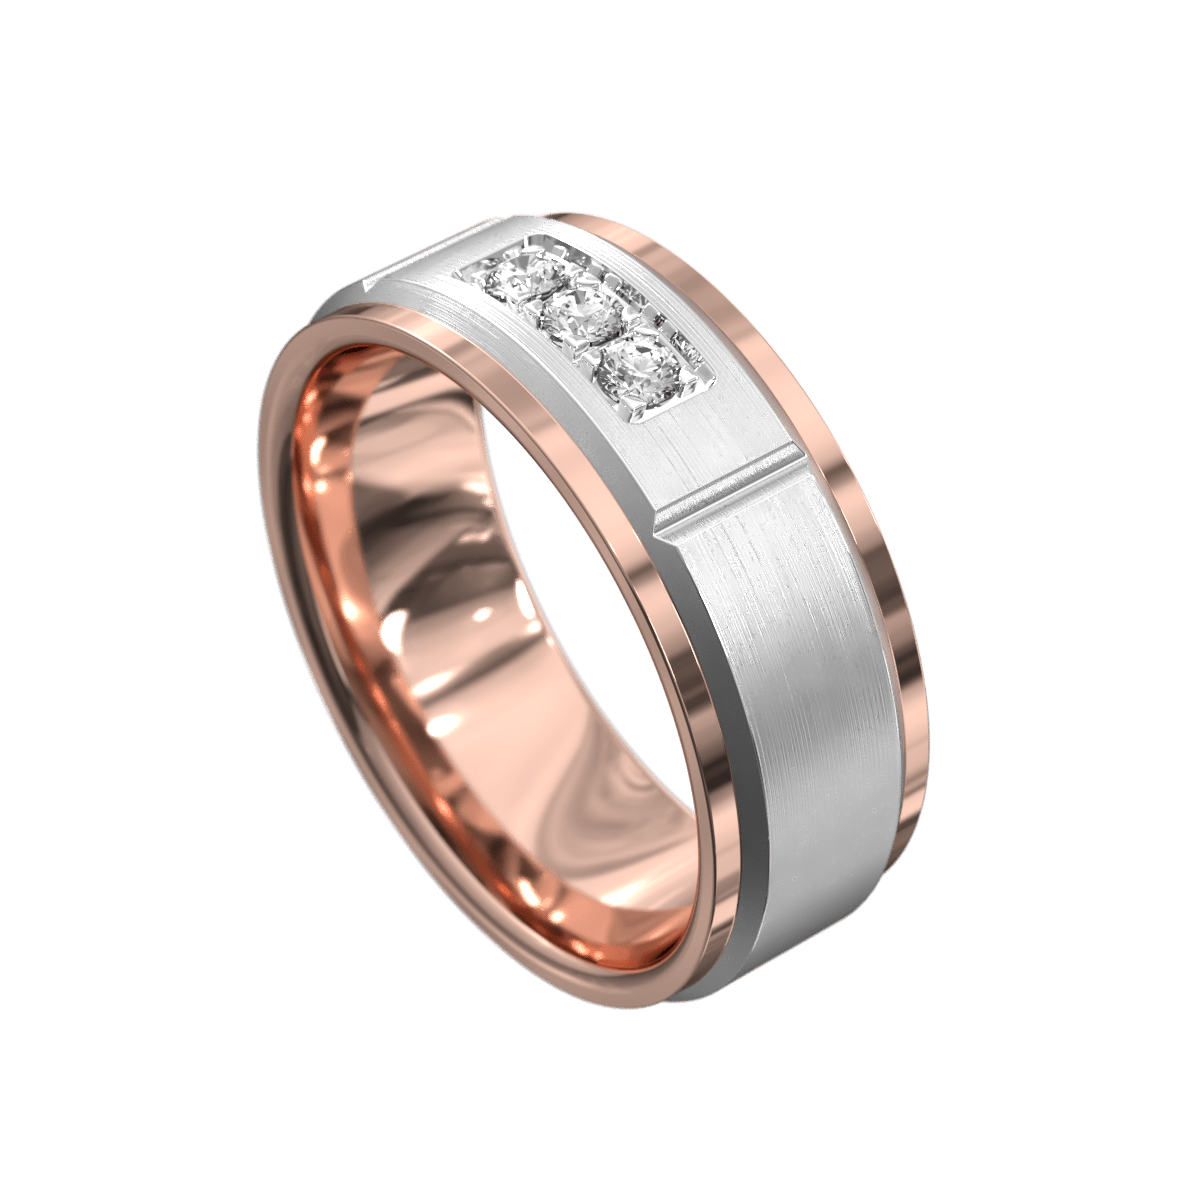 Rose and White Gold Brushed Mens Ring